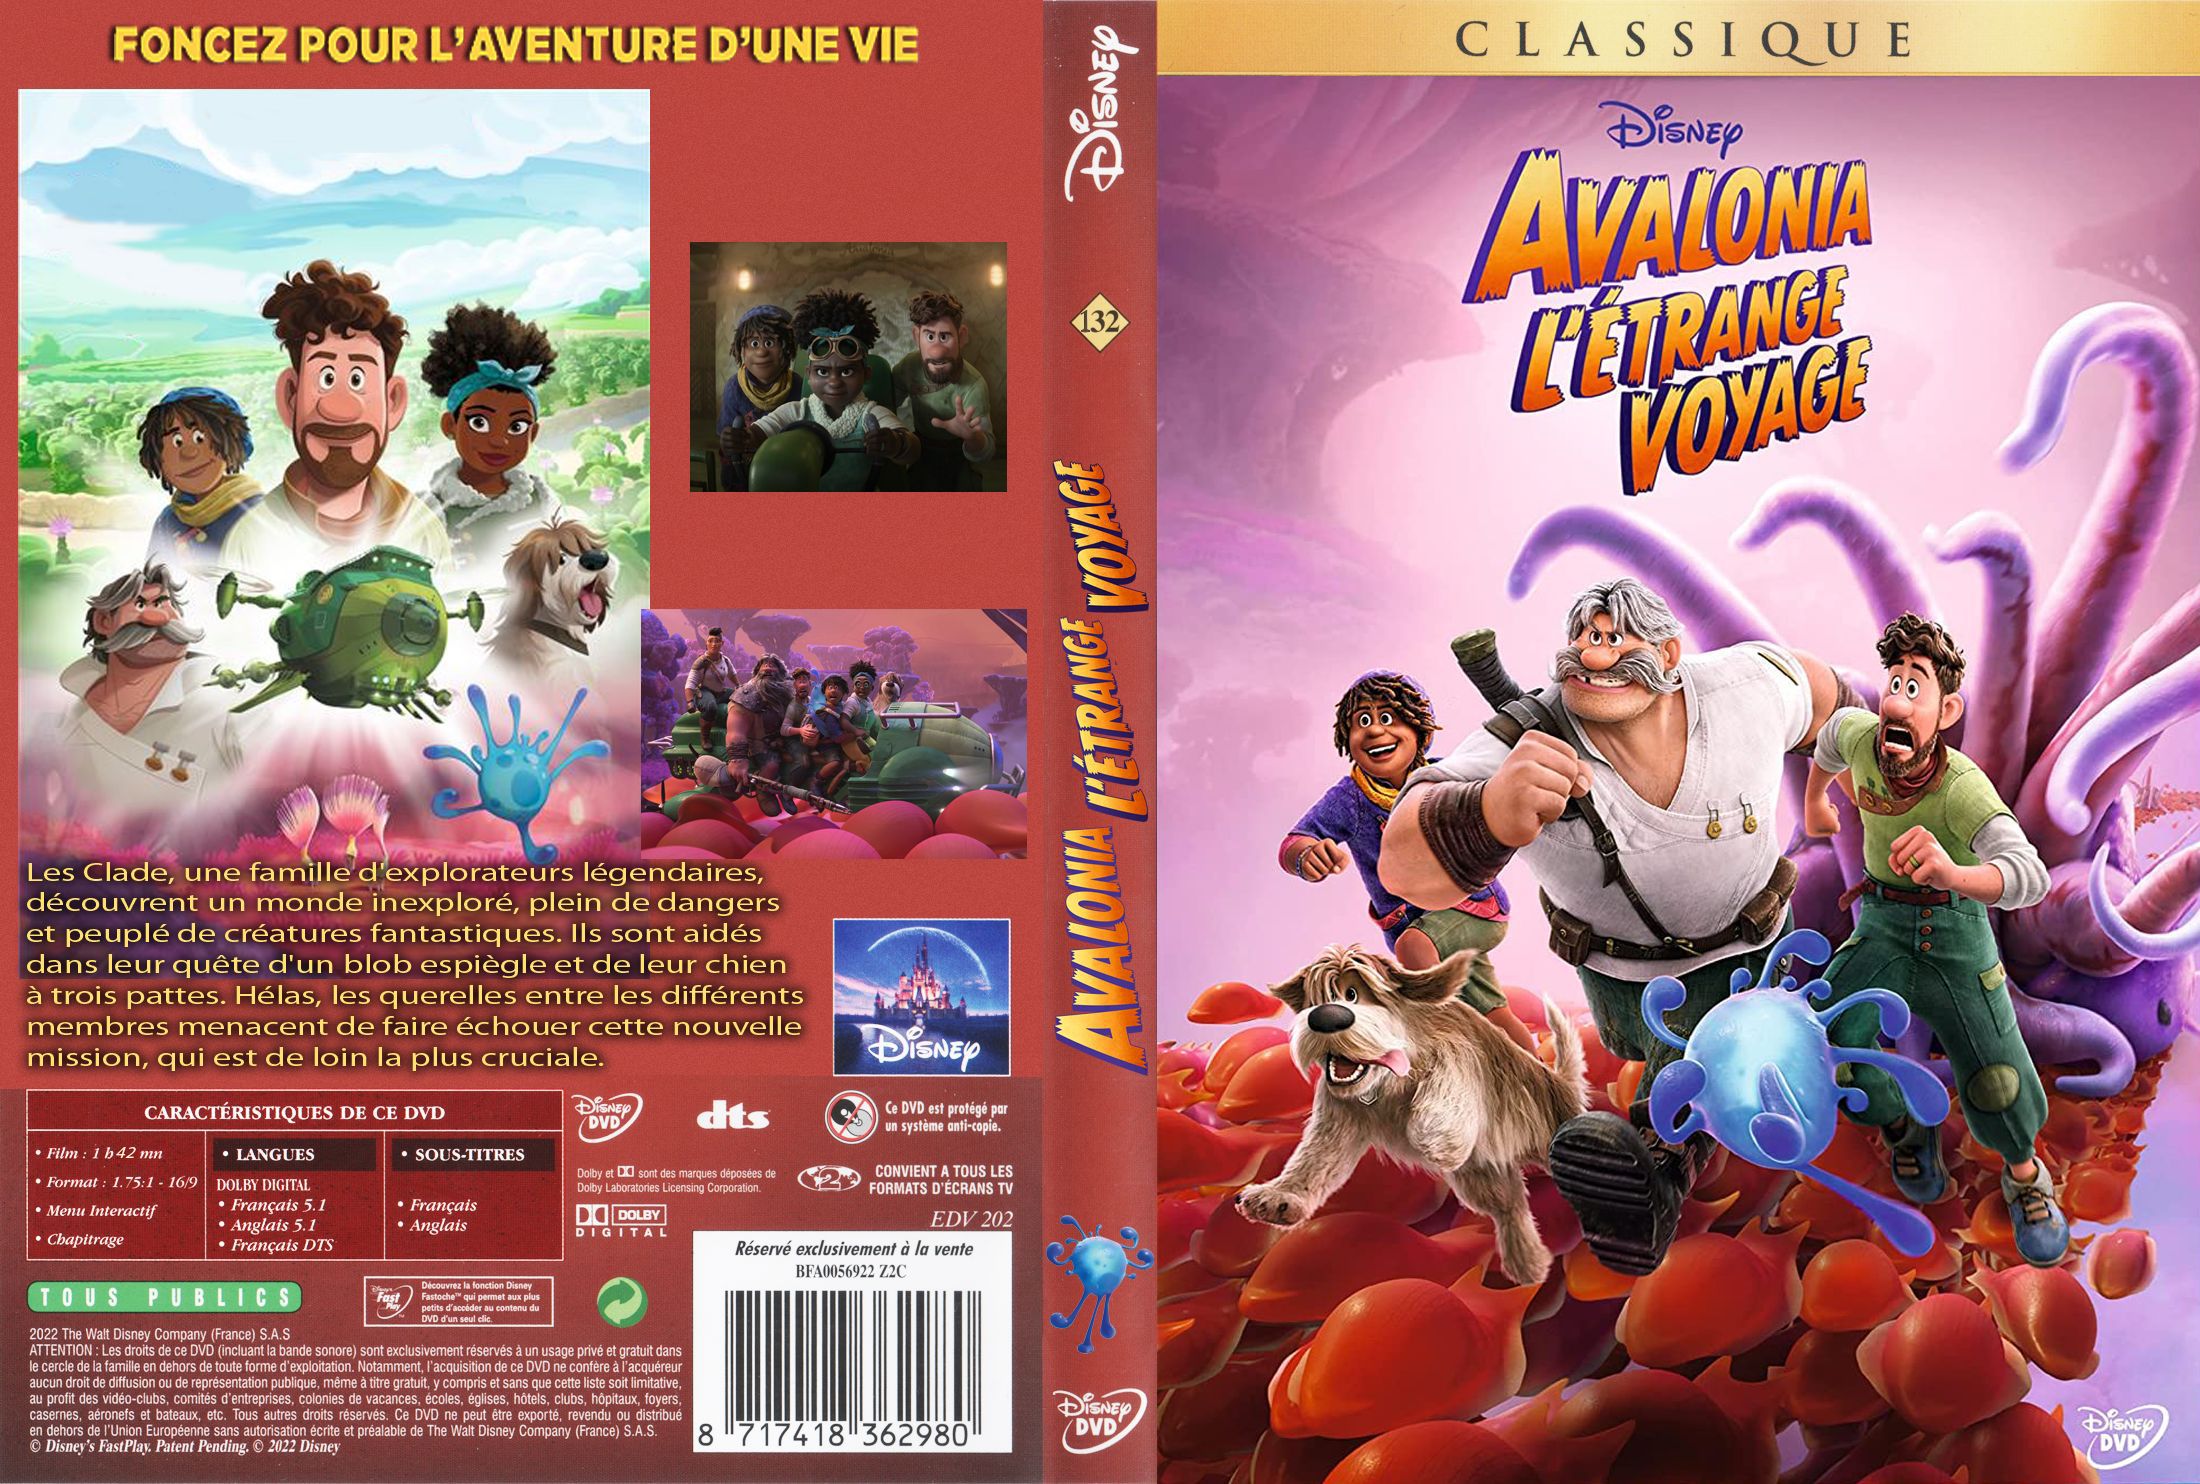 Jaquette DVD Avalonia l